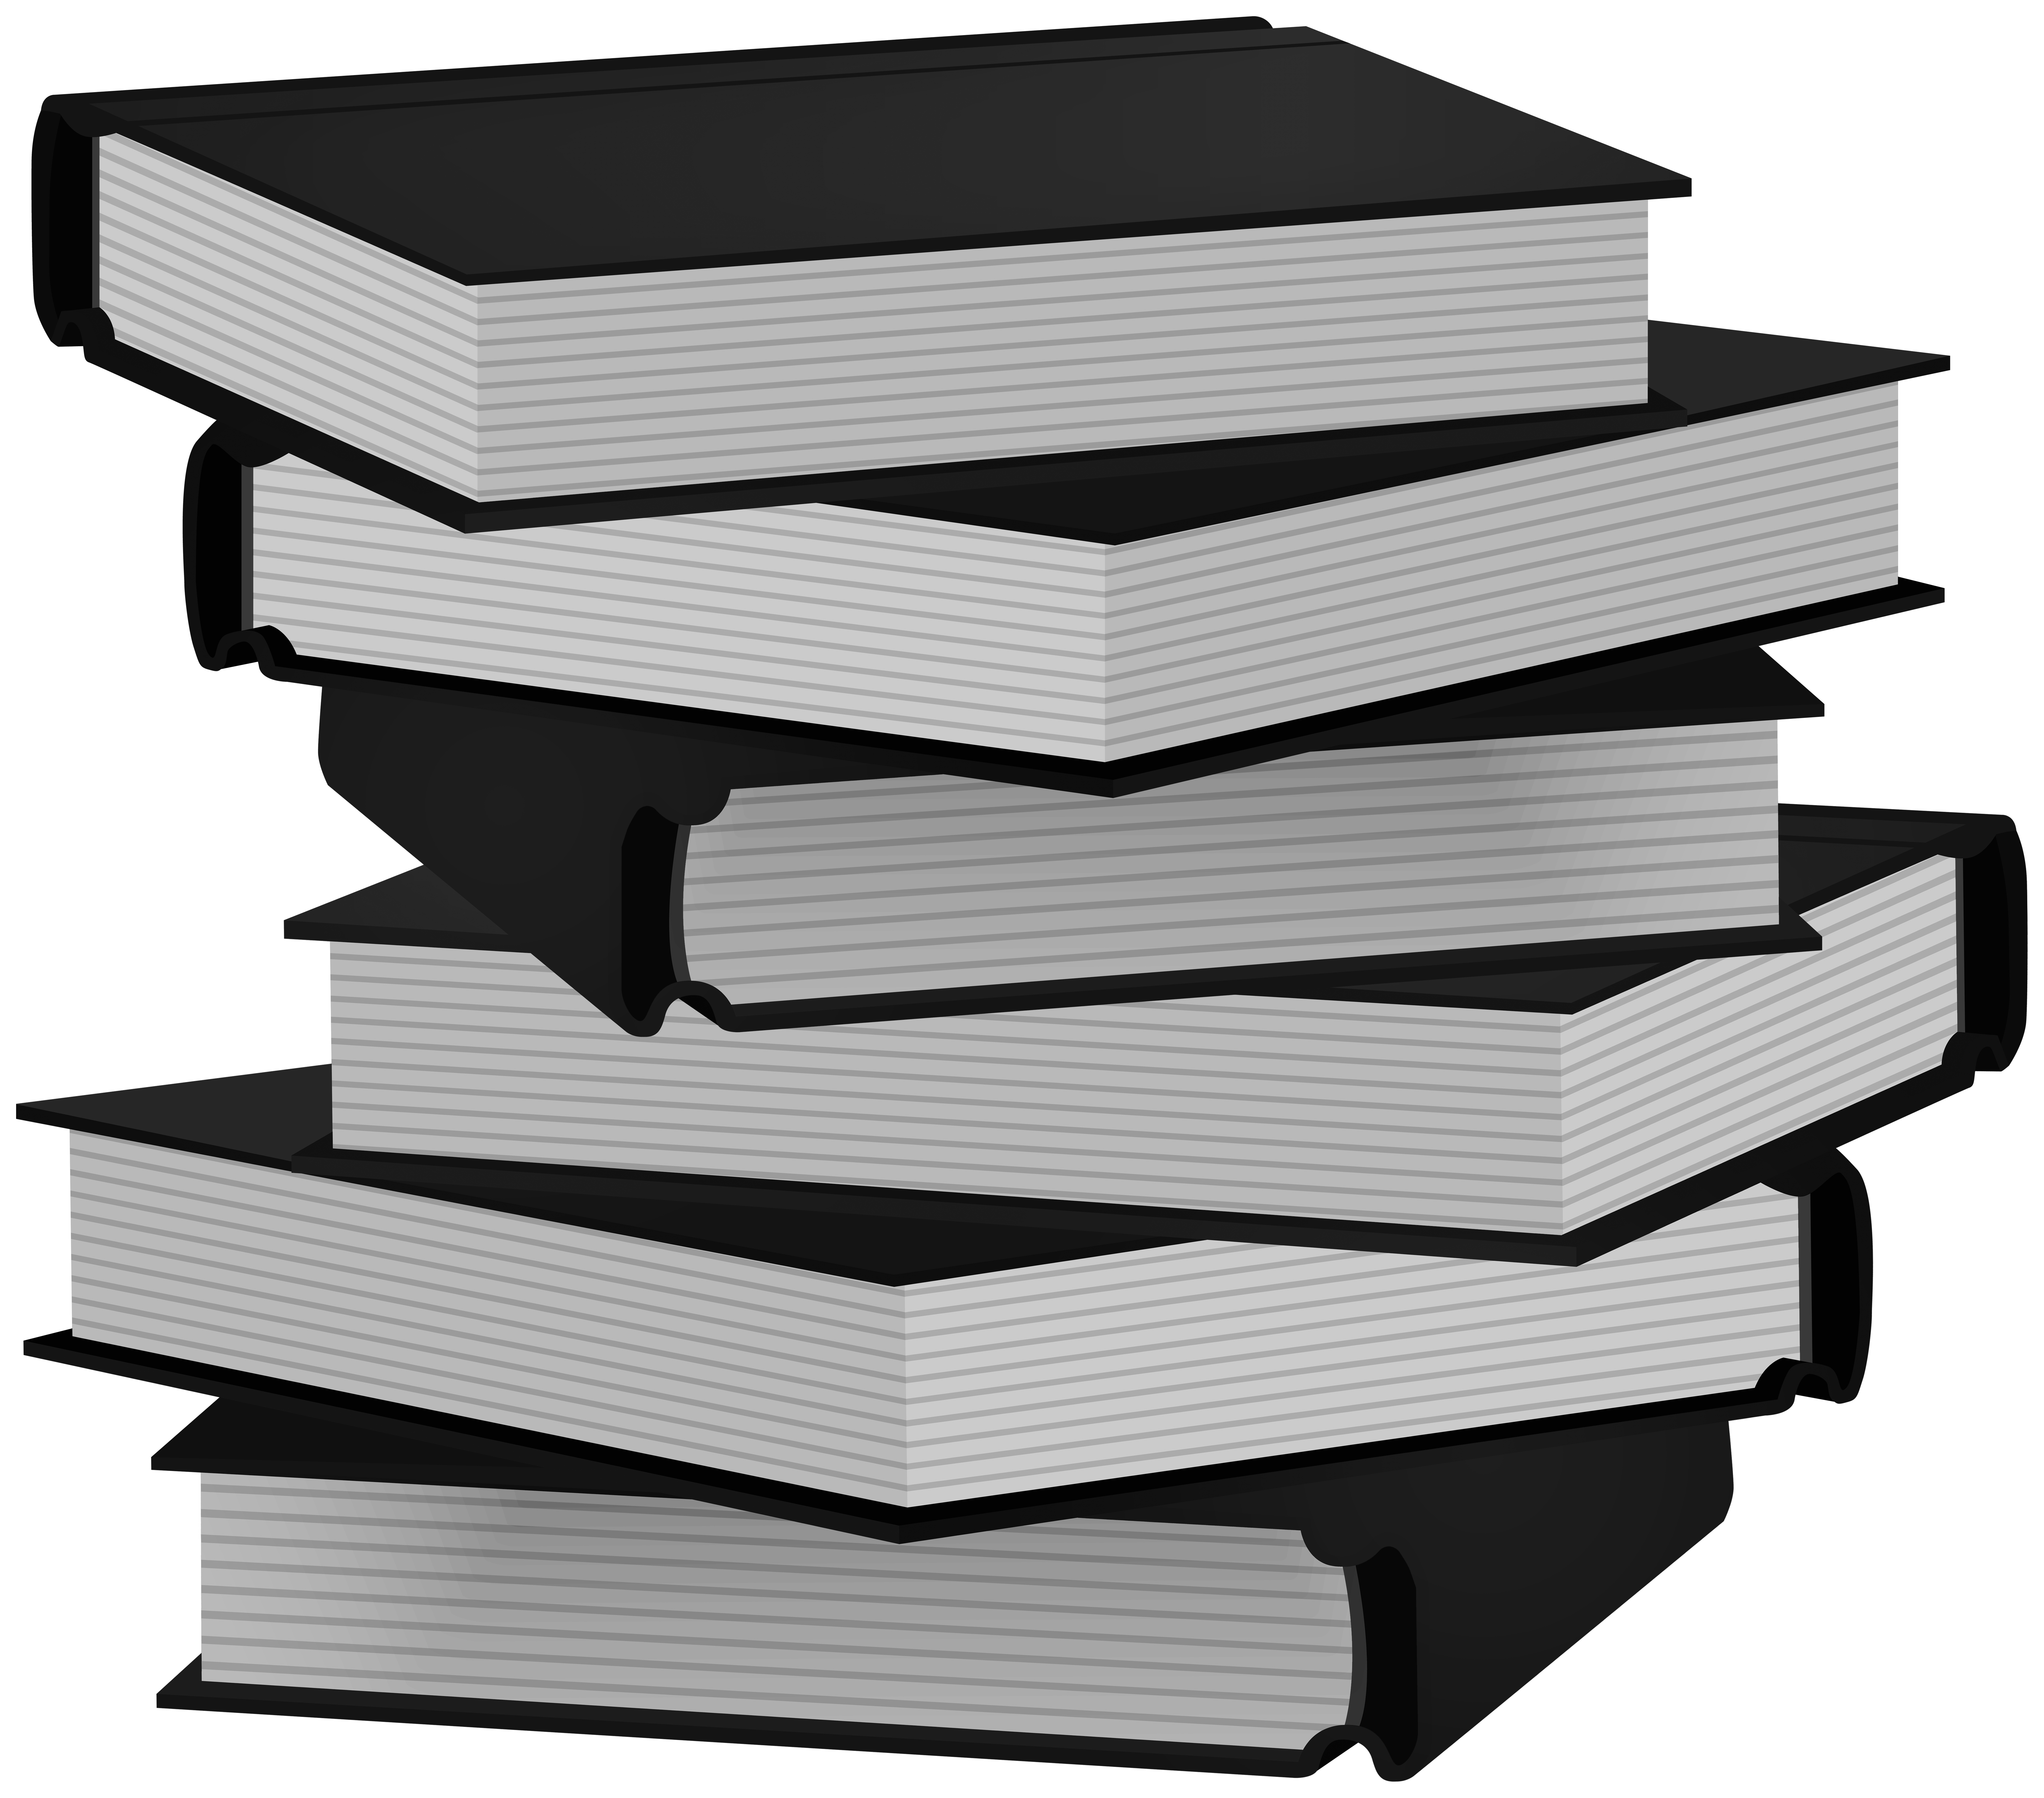 tall stack of books black and white